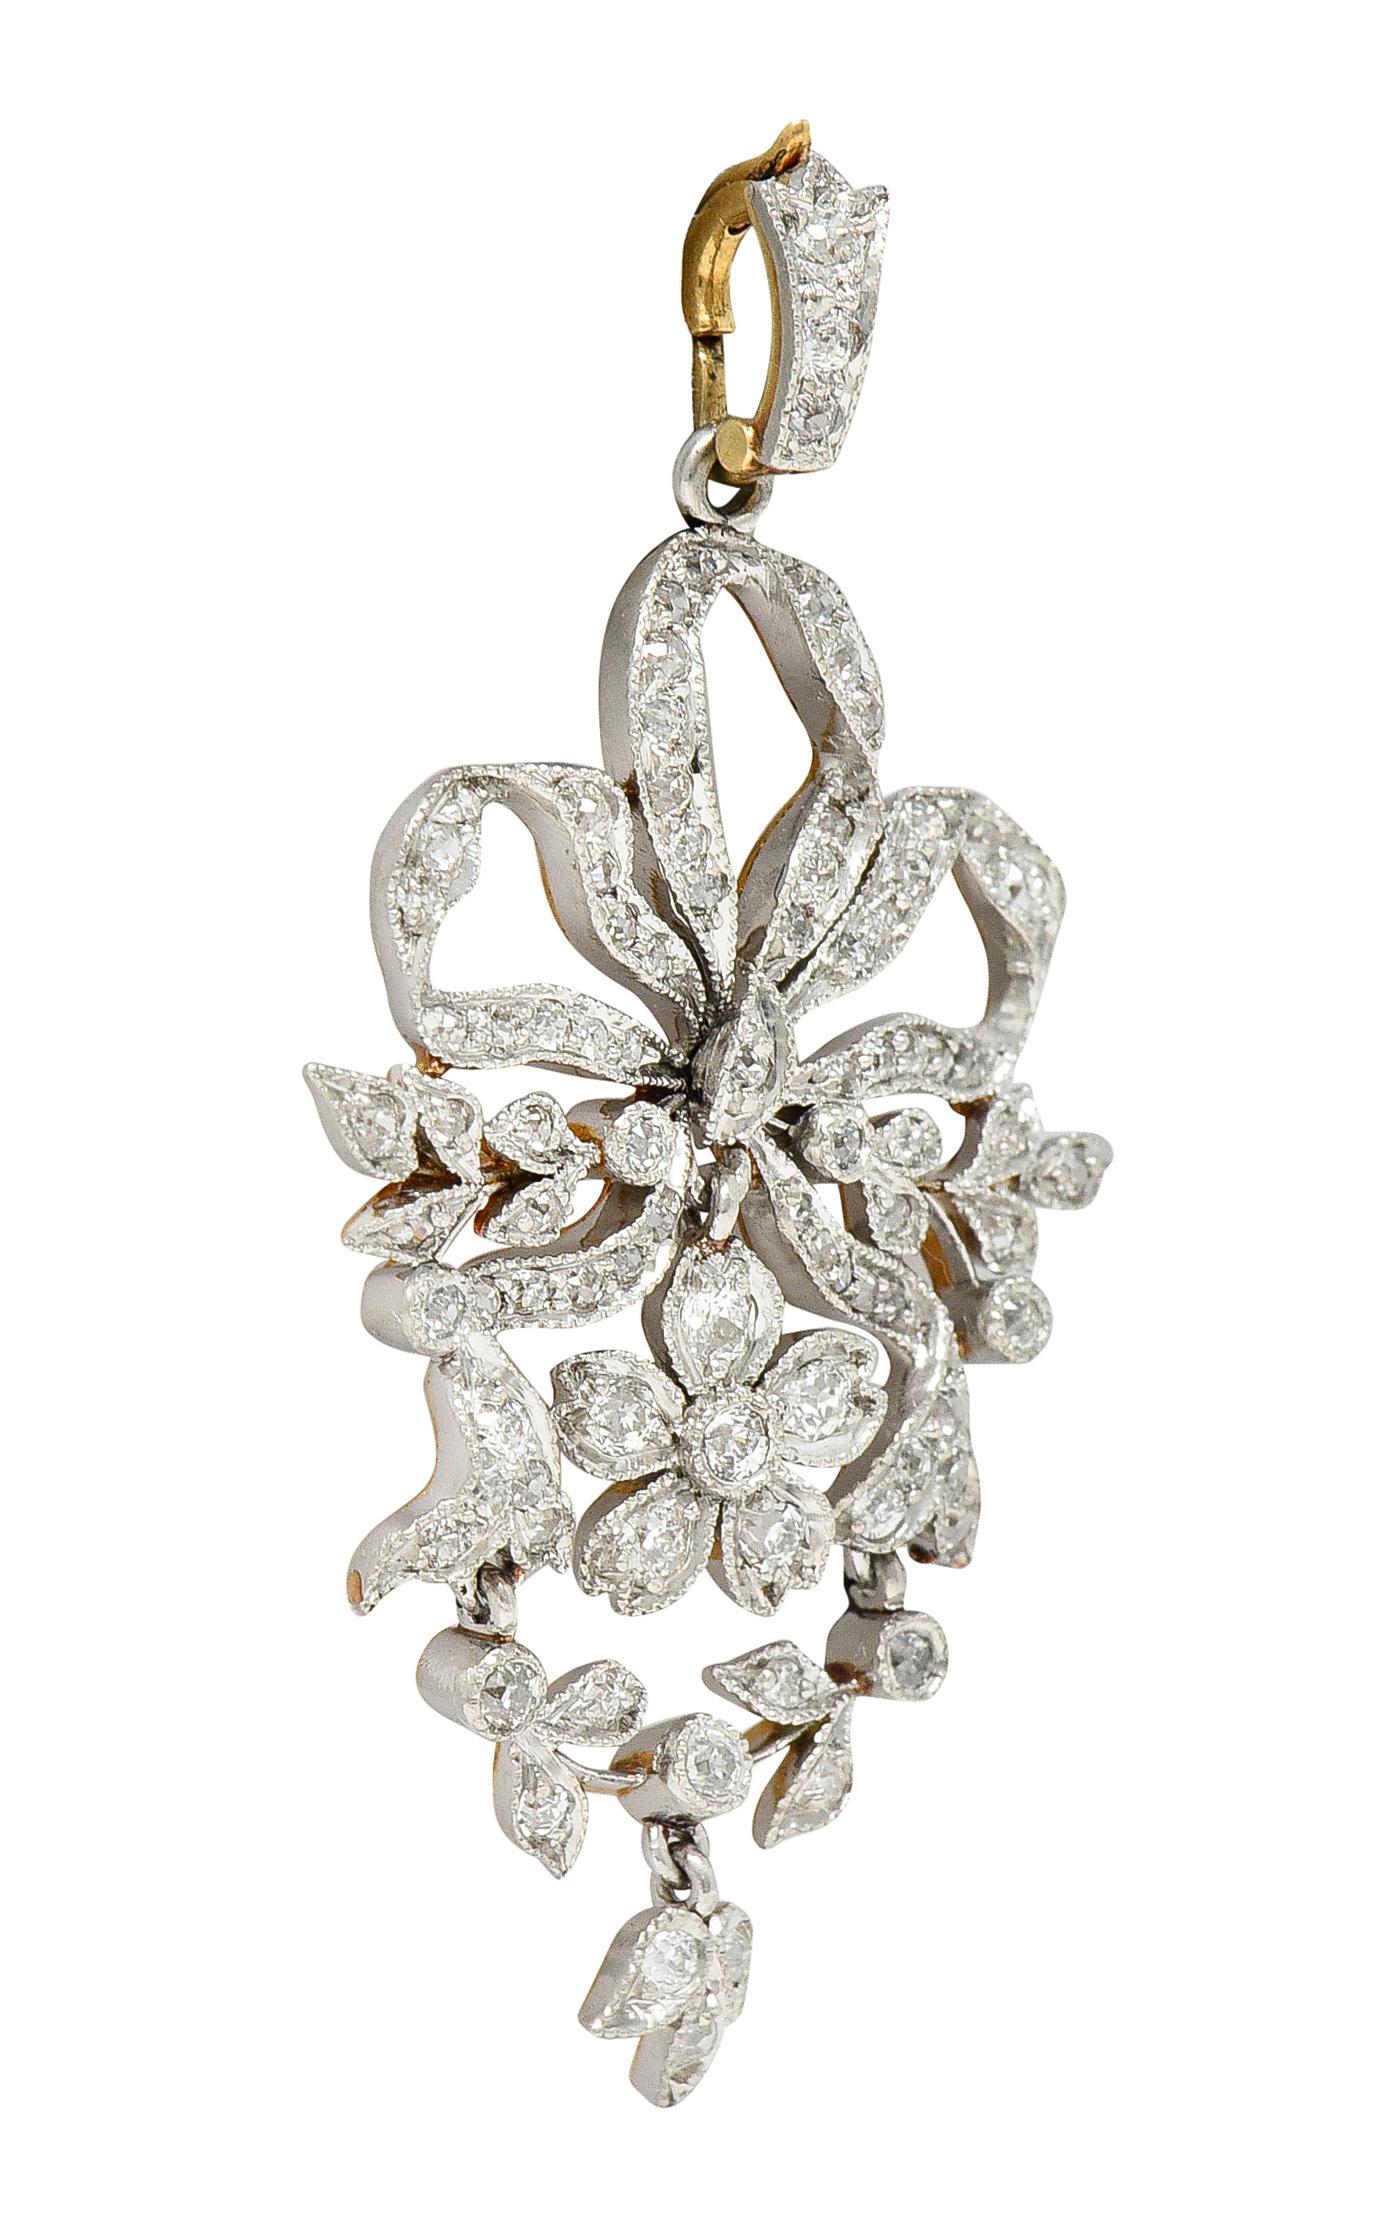 Enhancer pendant is designed as a ribboned bow centering an articulated floral drop. Suspending an articulated laurel foliate surround with drop. Accented throughout by old European cut diamonds. Weighing in total approximately 1.30 carats - G to J